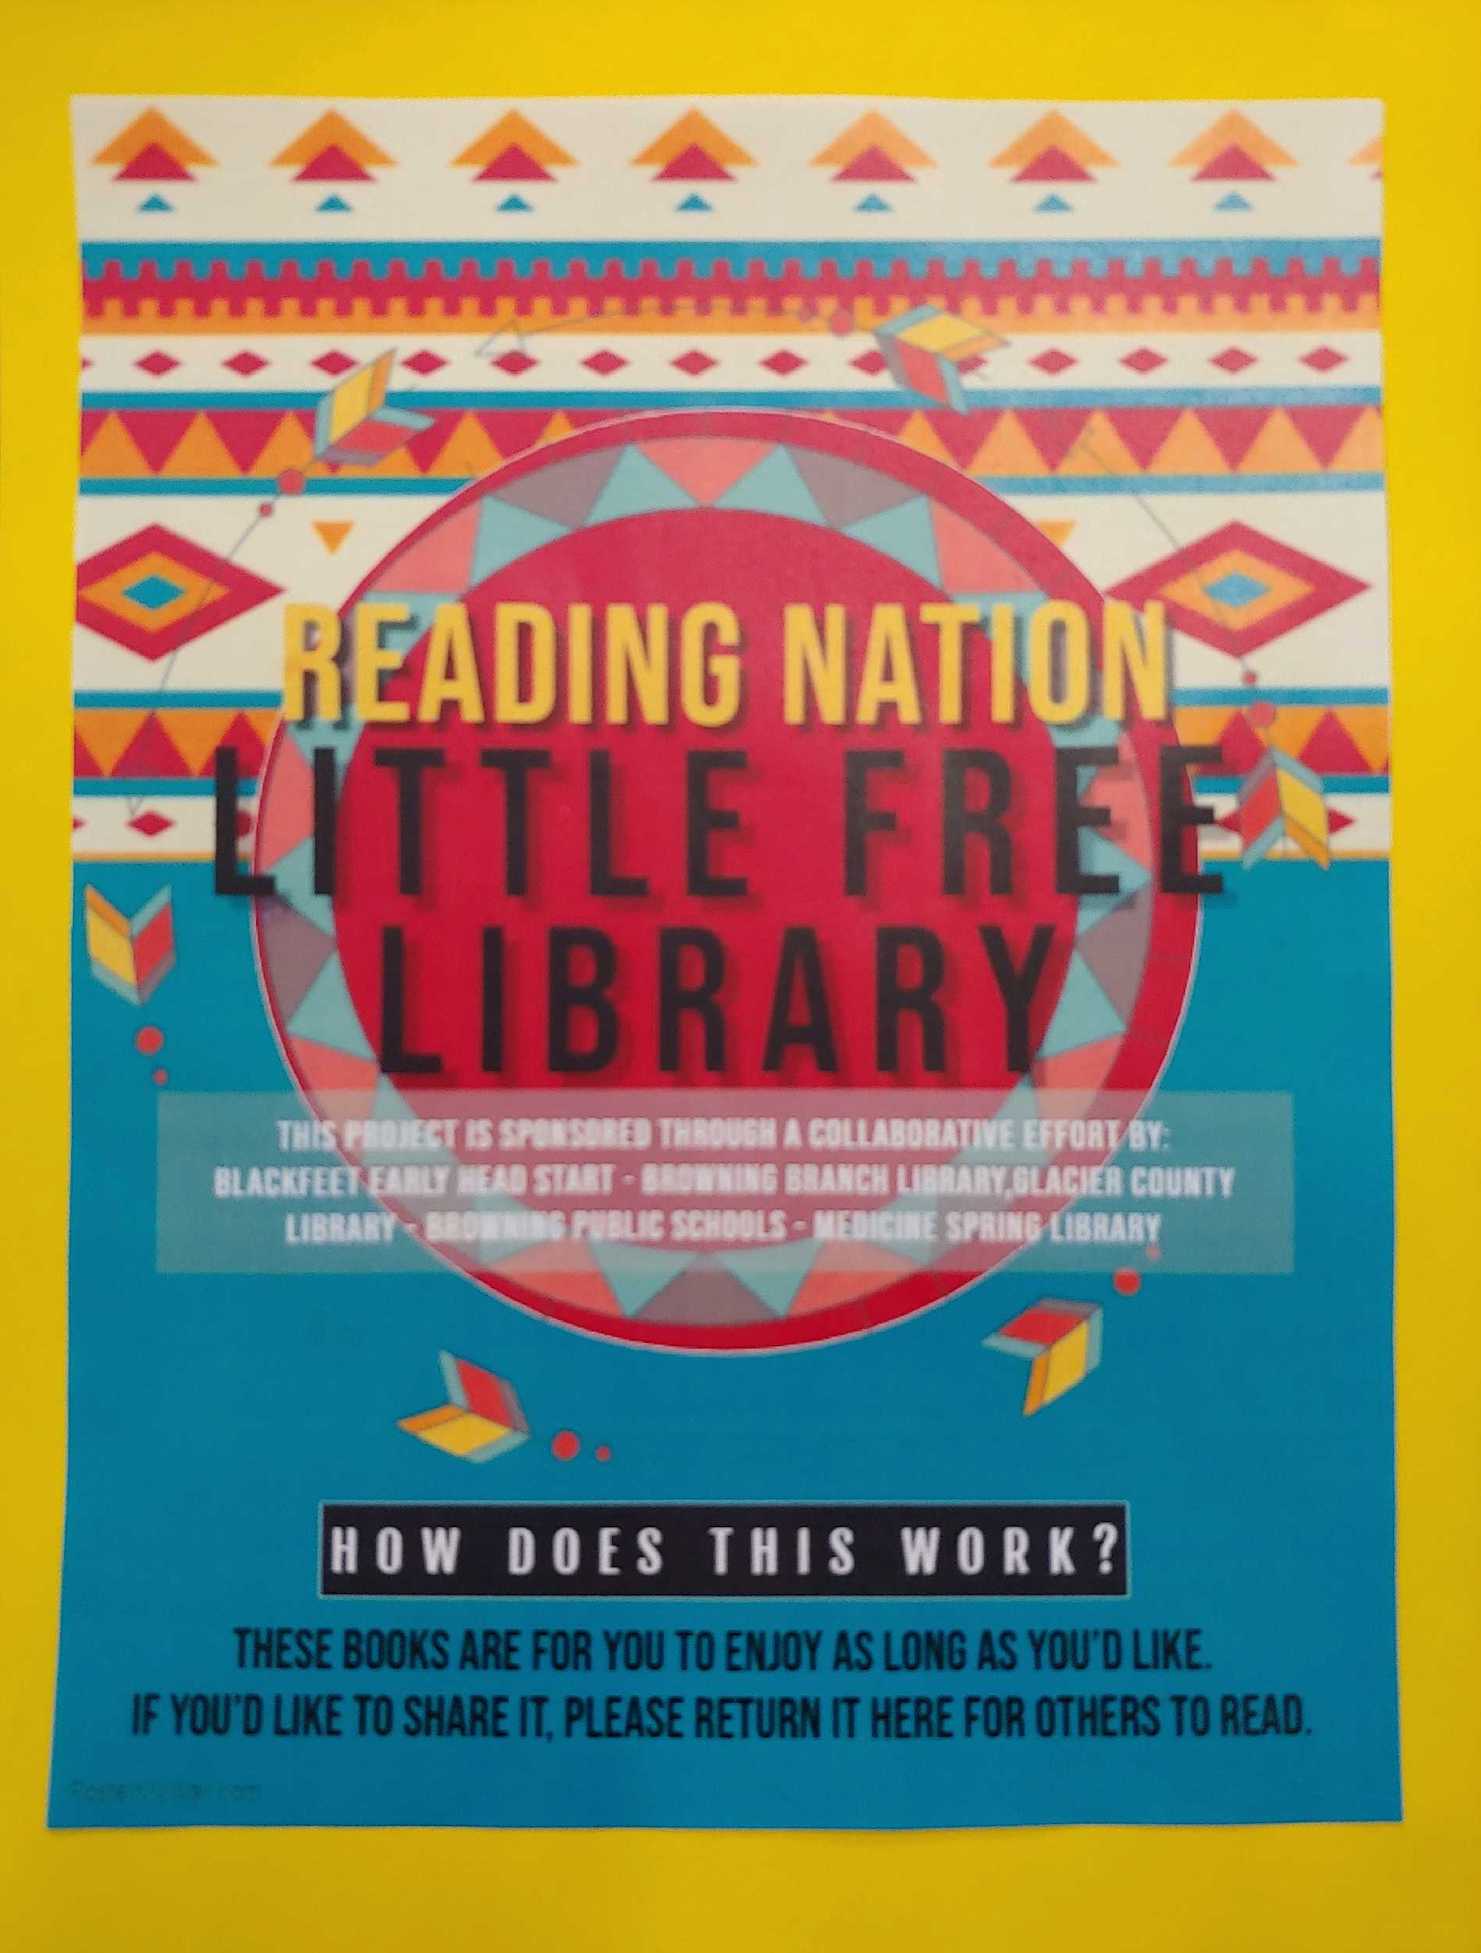 IMLS-Funded Reading Nation Waterfall Project To Bring Curated Little Free Libraries To Native American Children